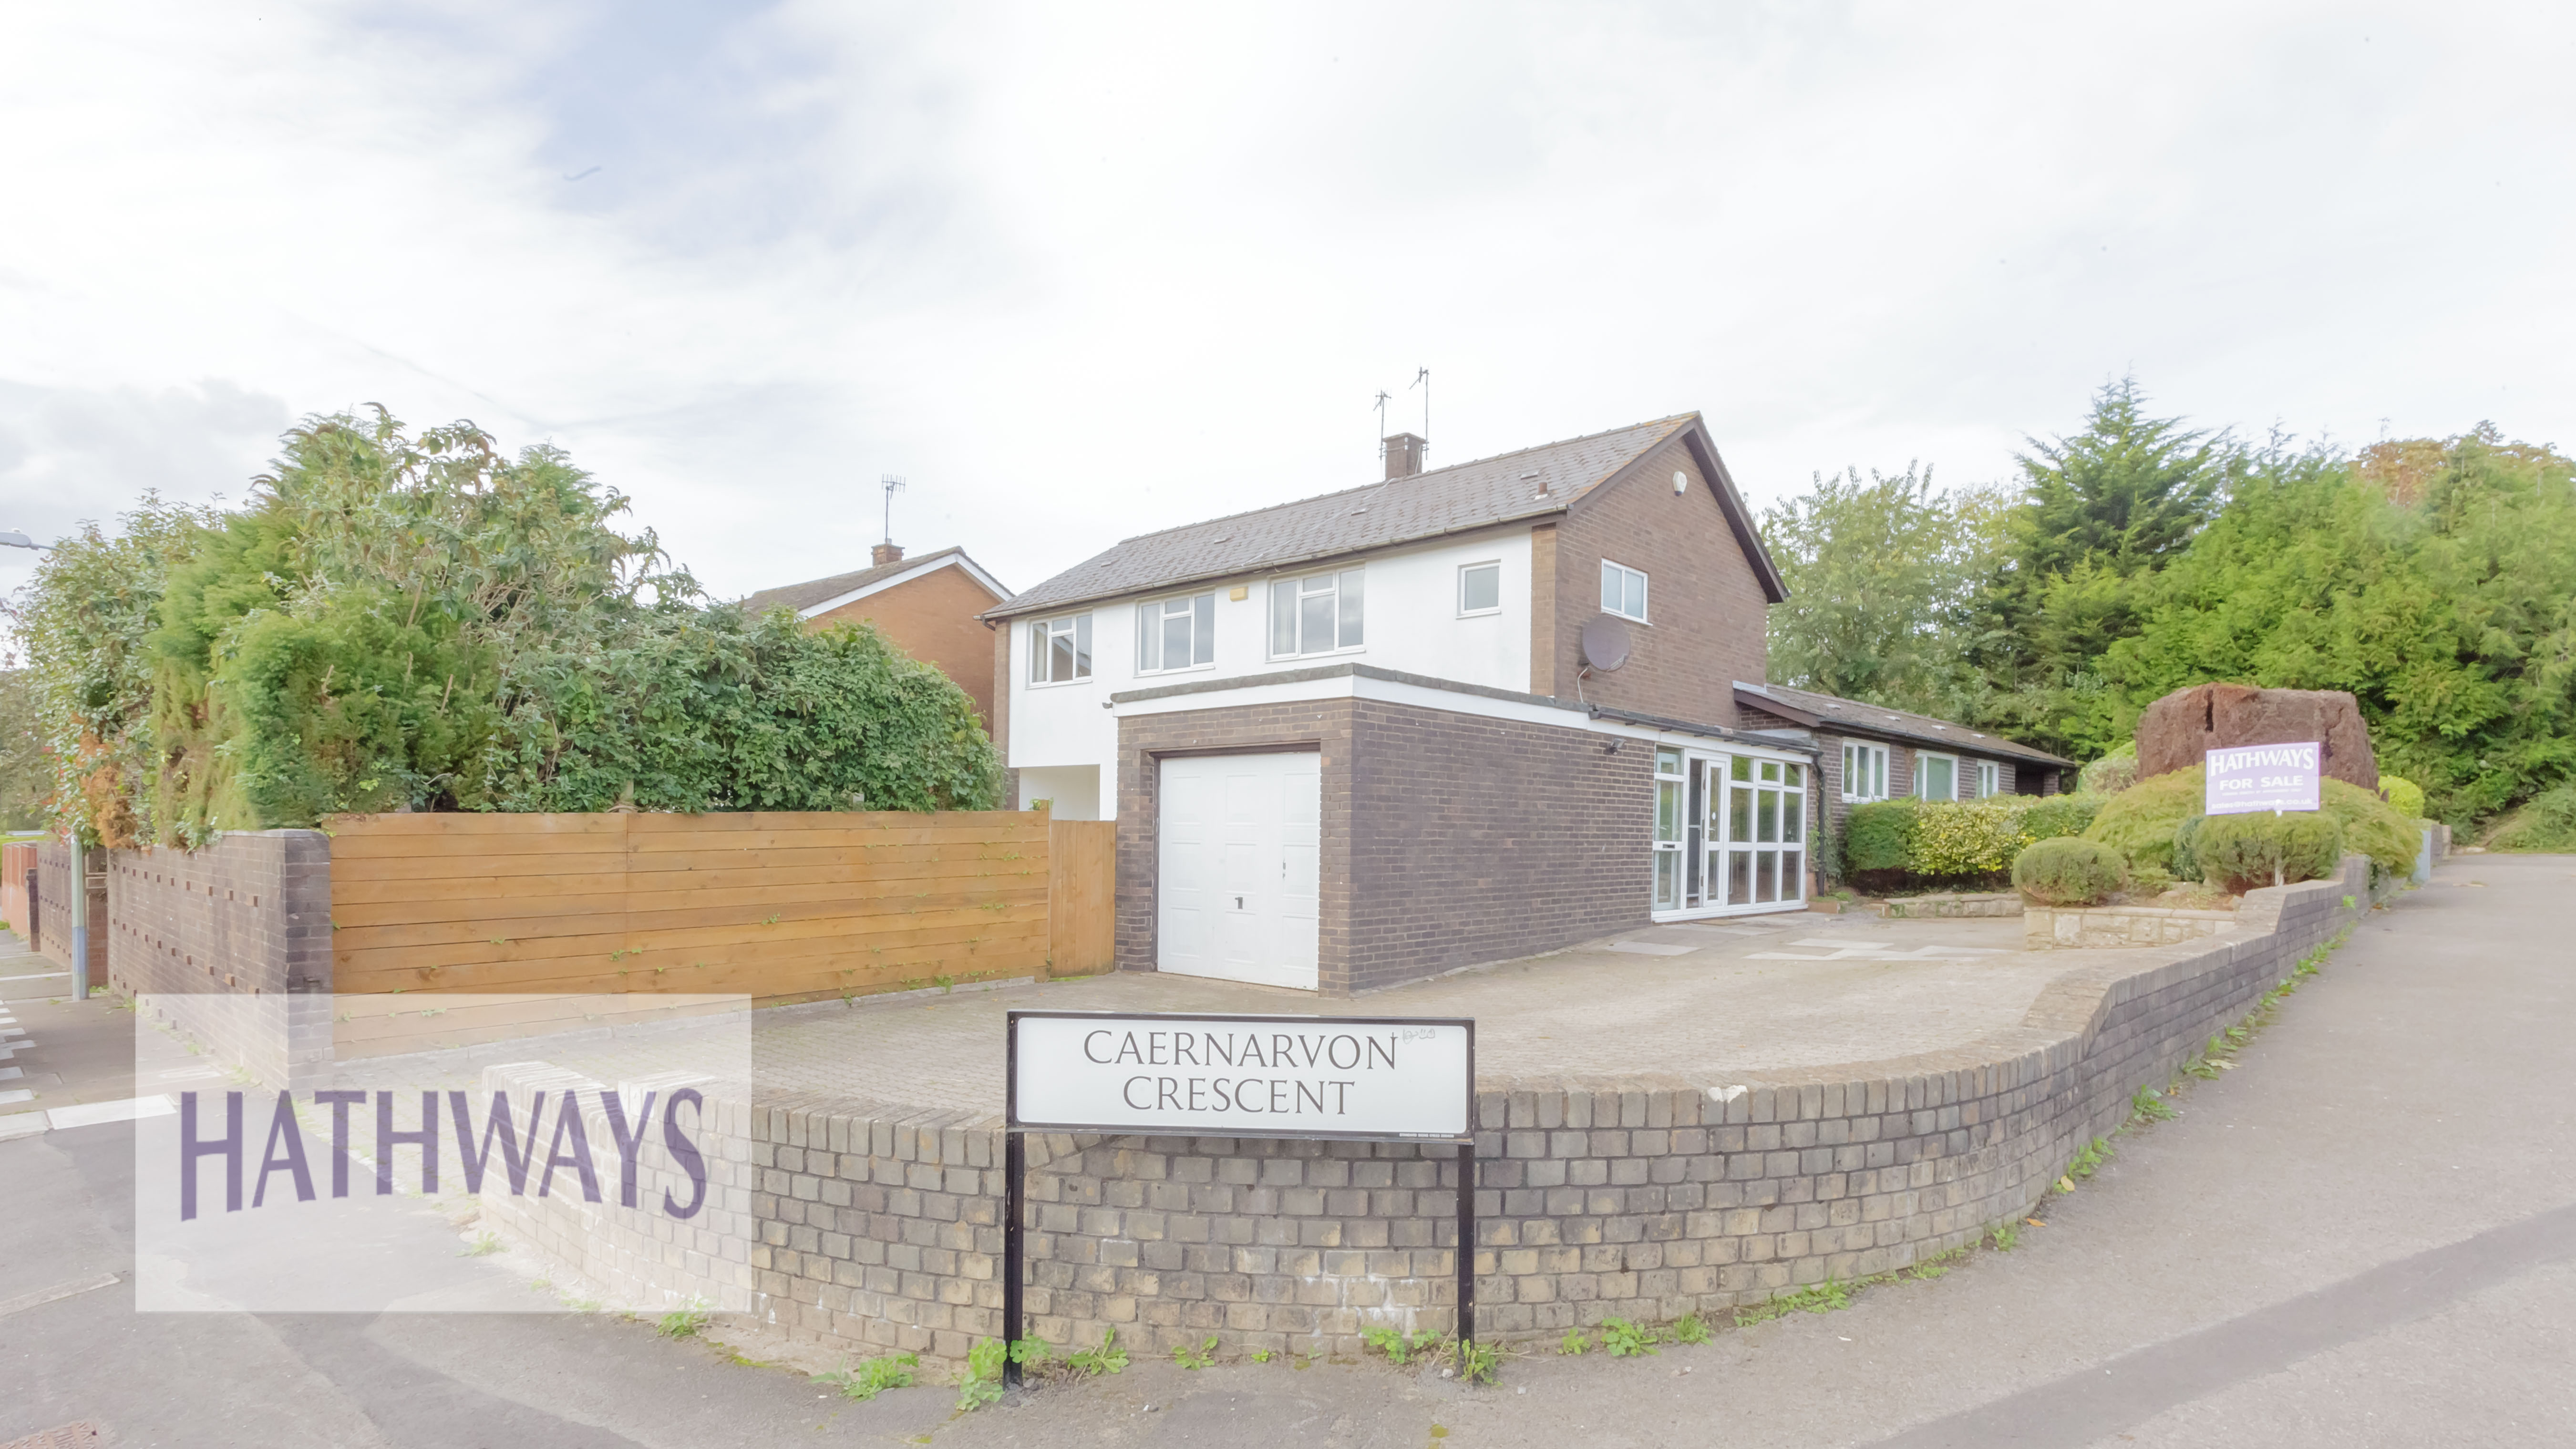 4 bed house for sale in Caernarvon Crescent, Cwmbran  - Property Image 1